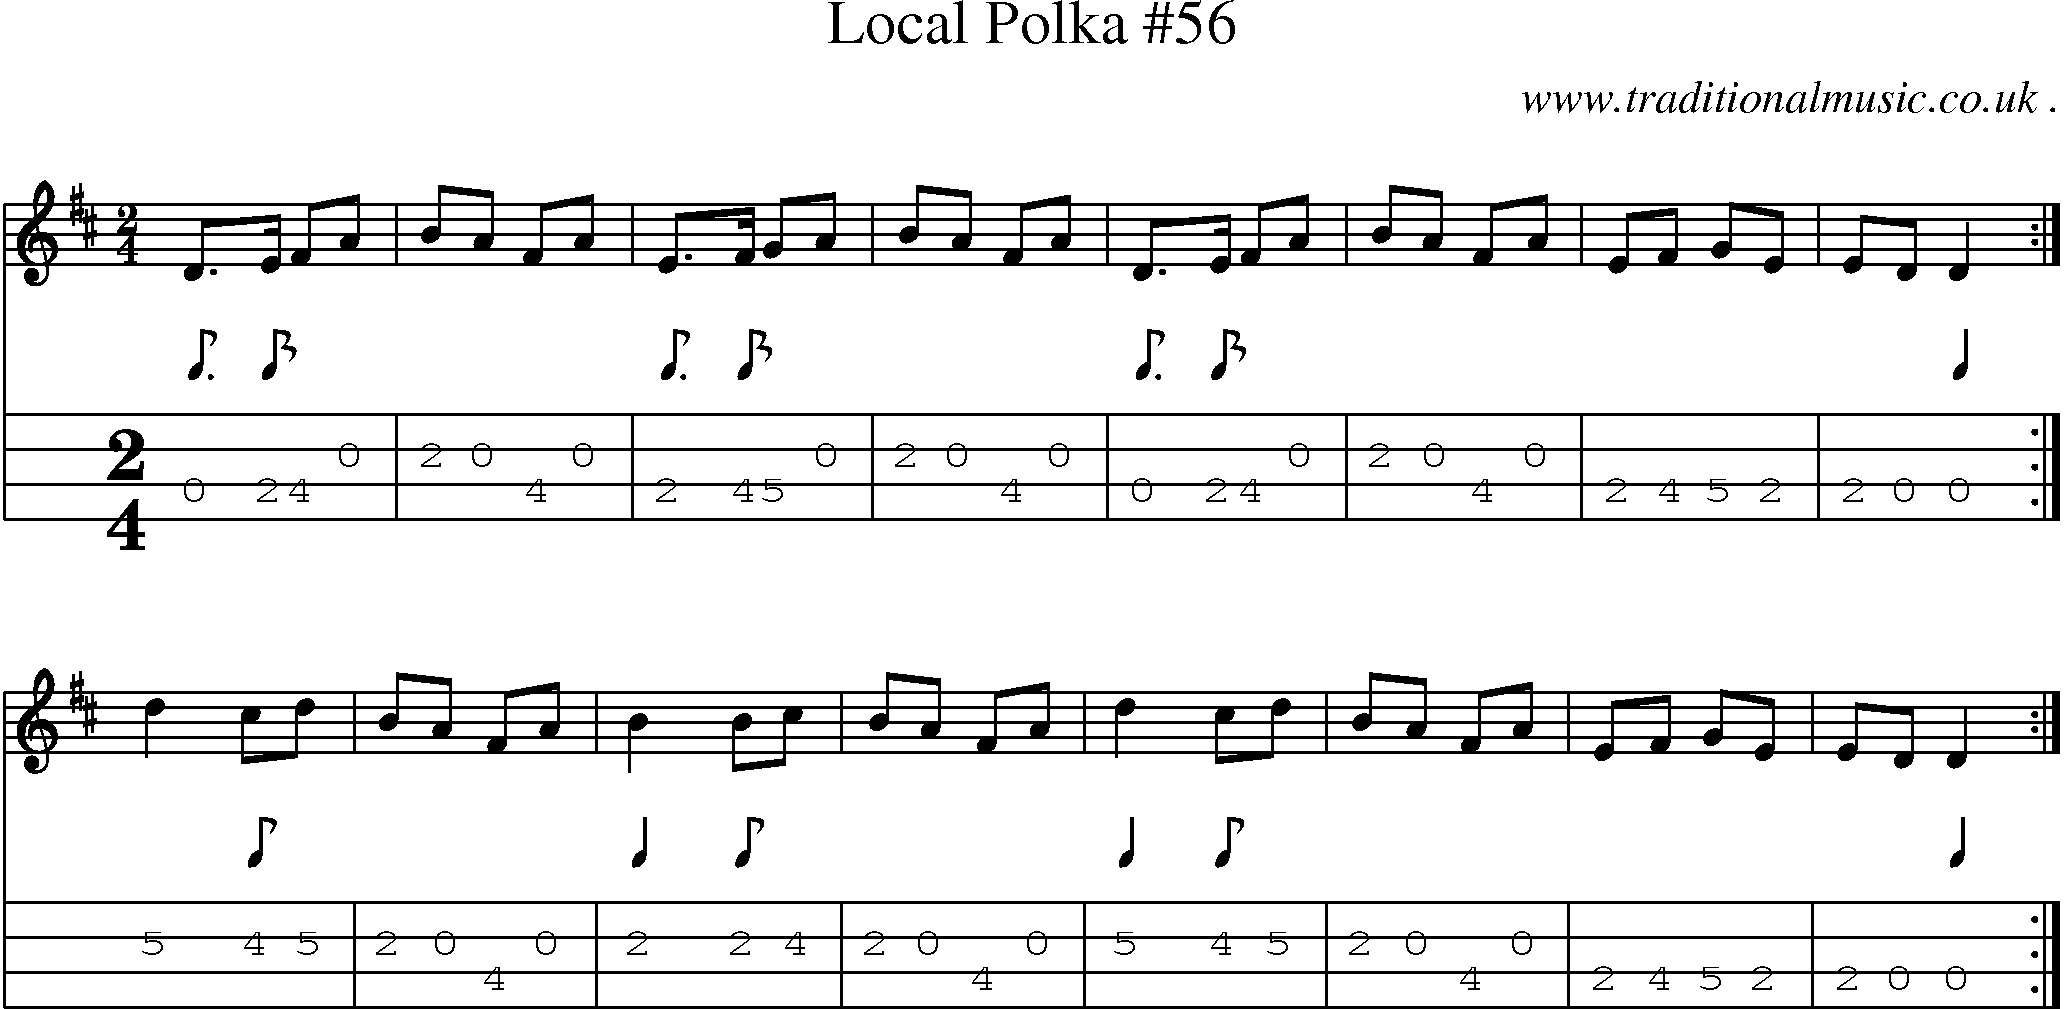 Sheet-music  score, Chords and Mandolin Tabs for Local Polka 56